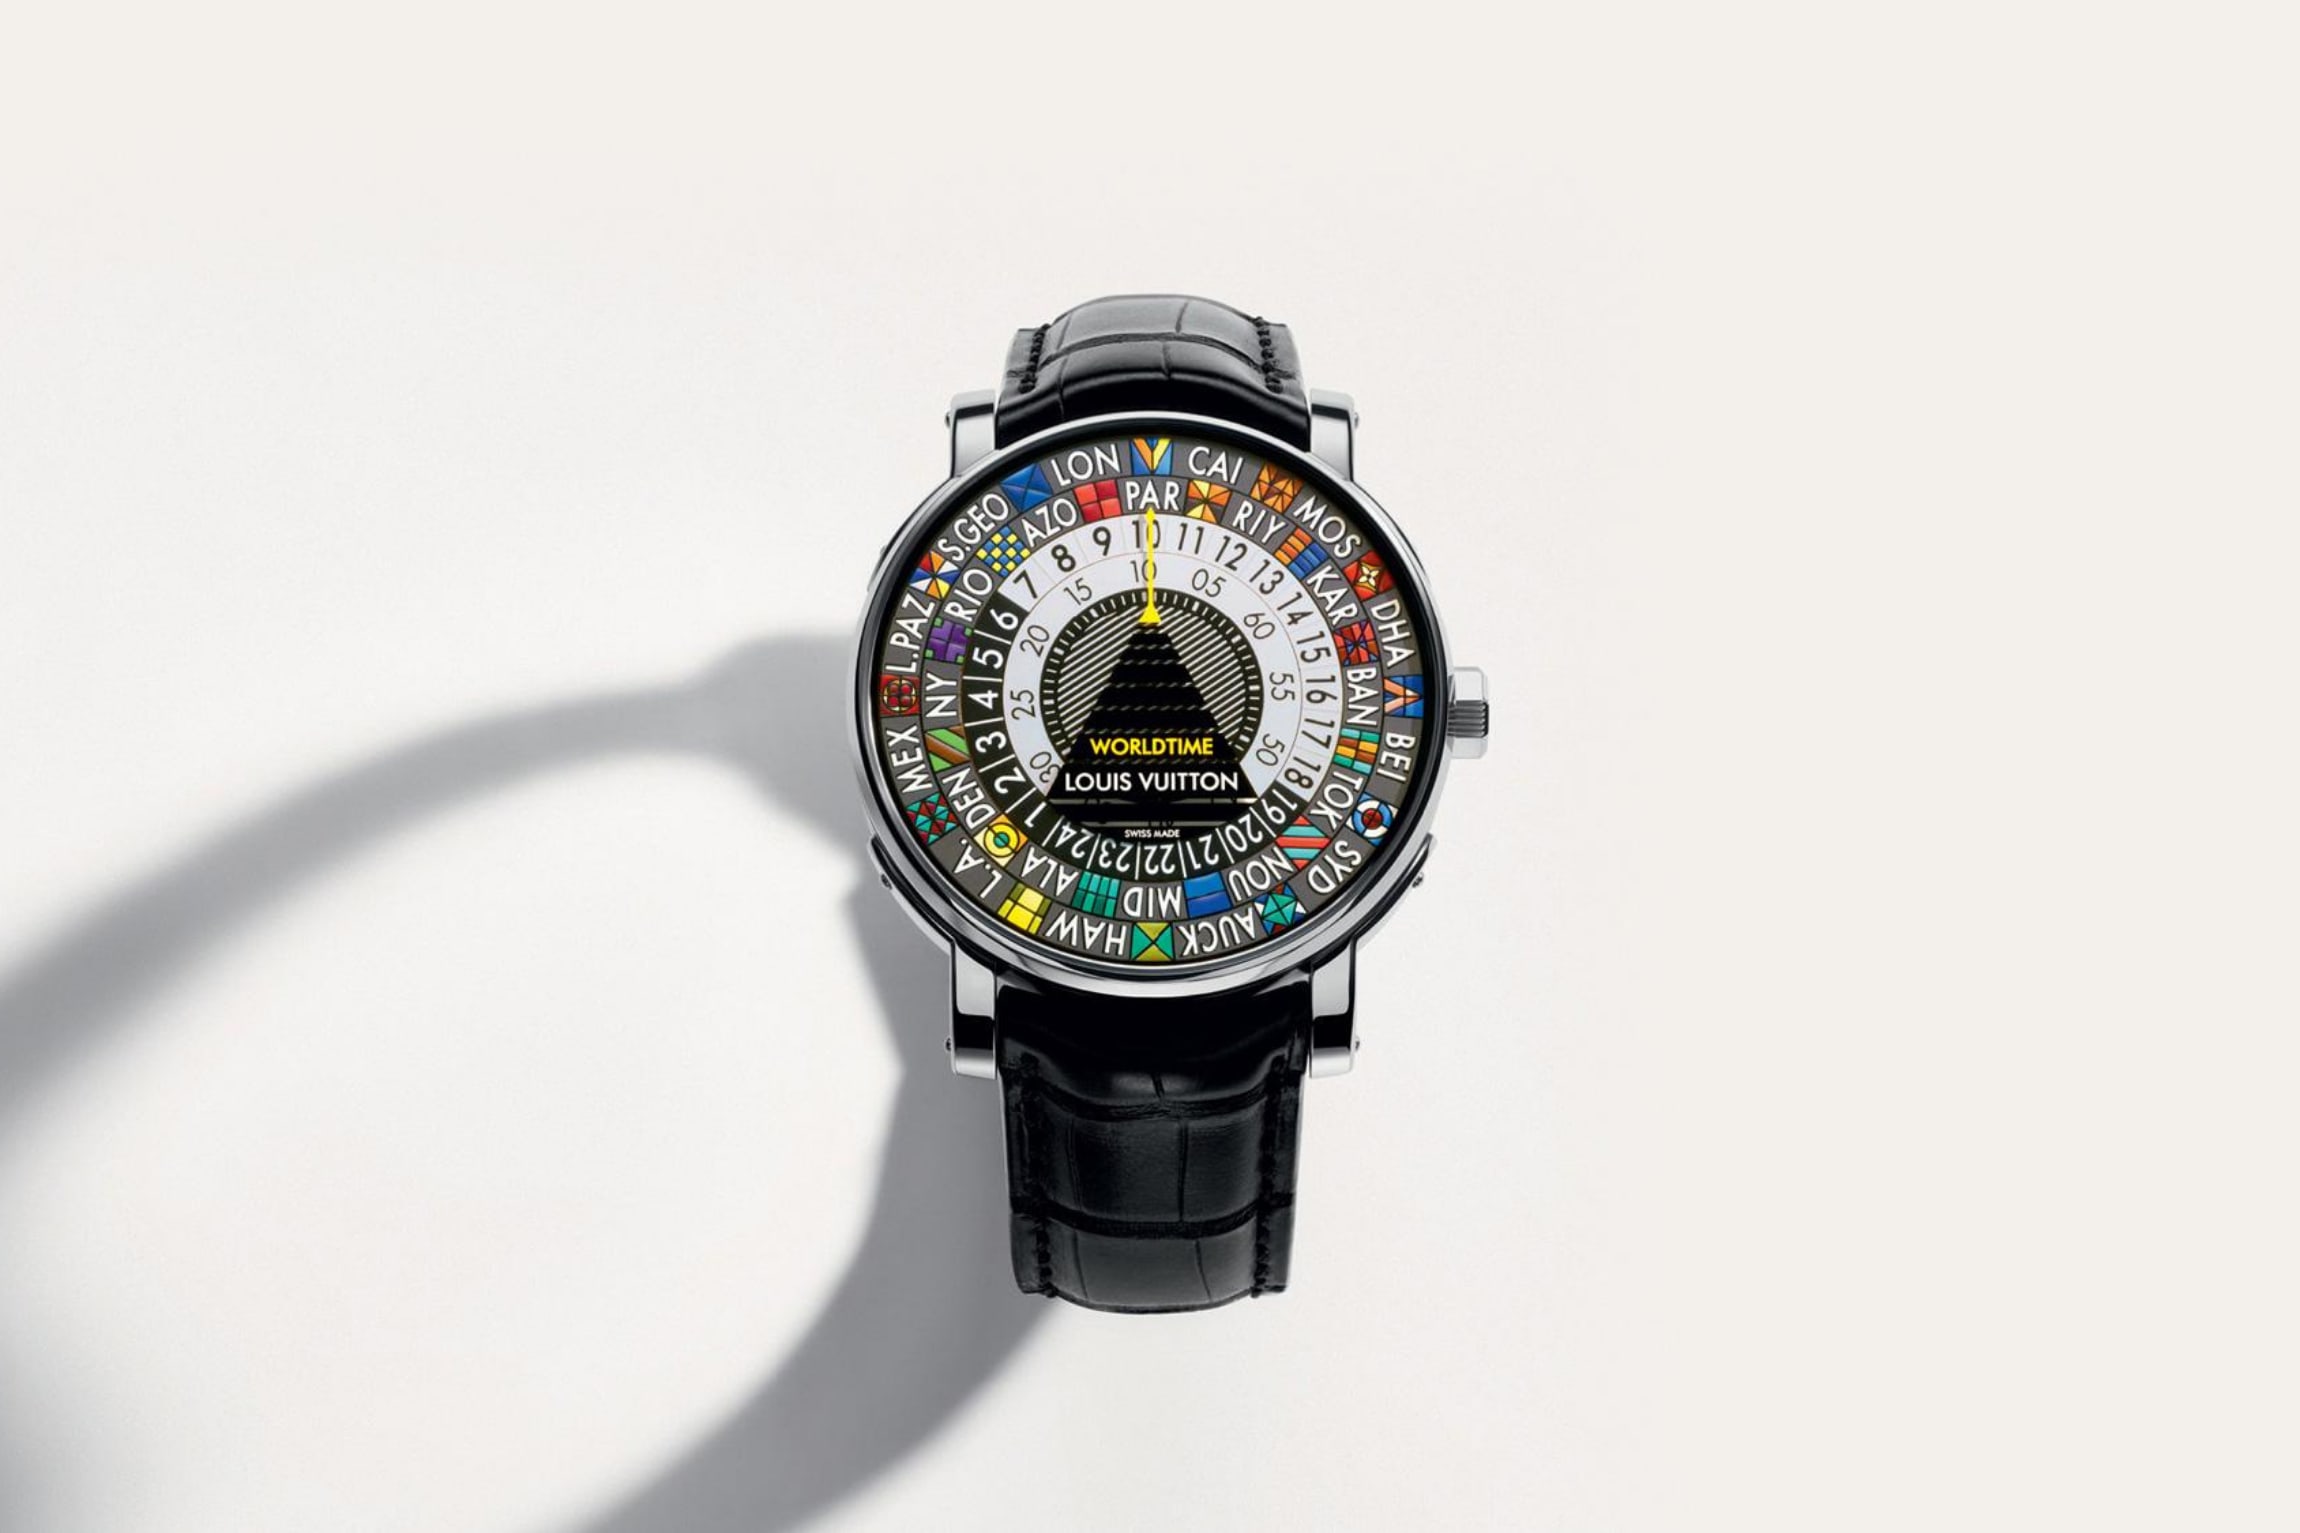 LV-I World Timer, developed by IWC